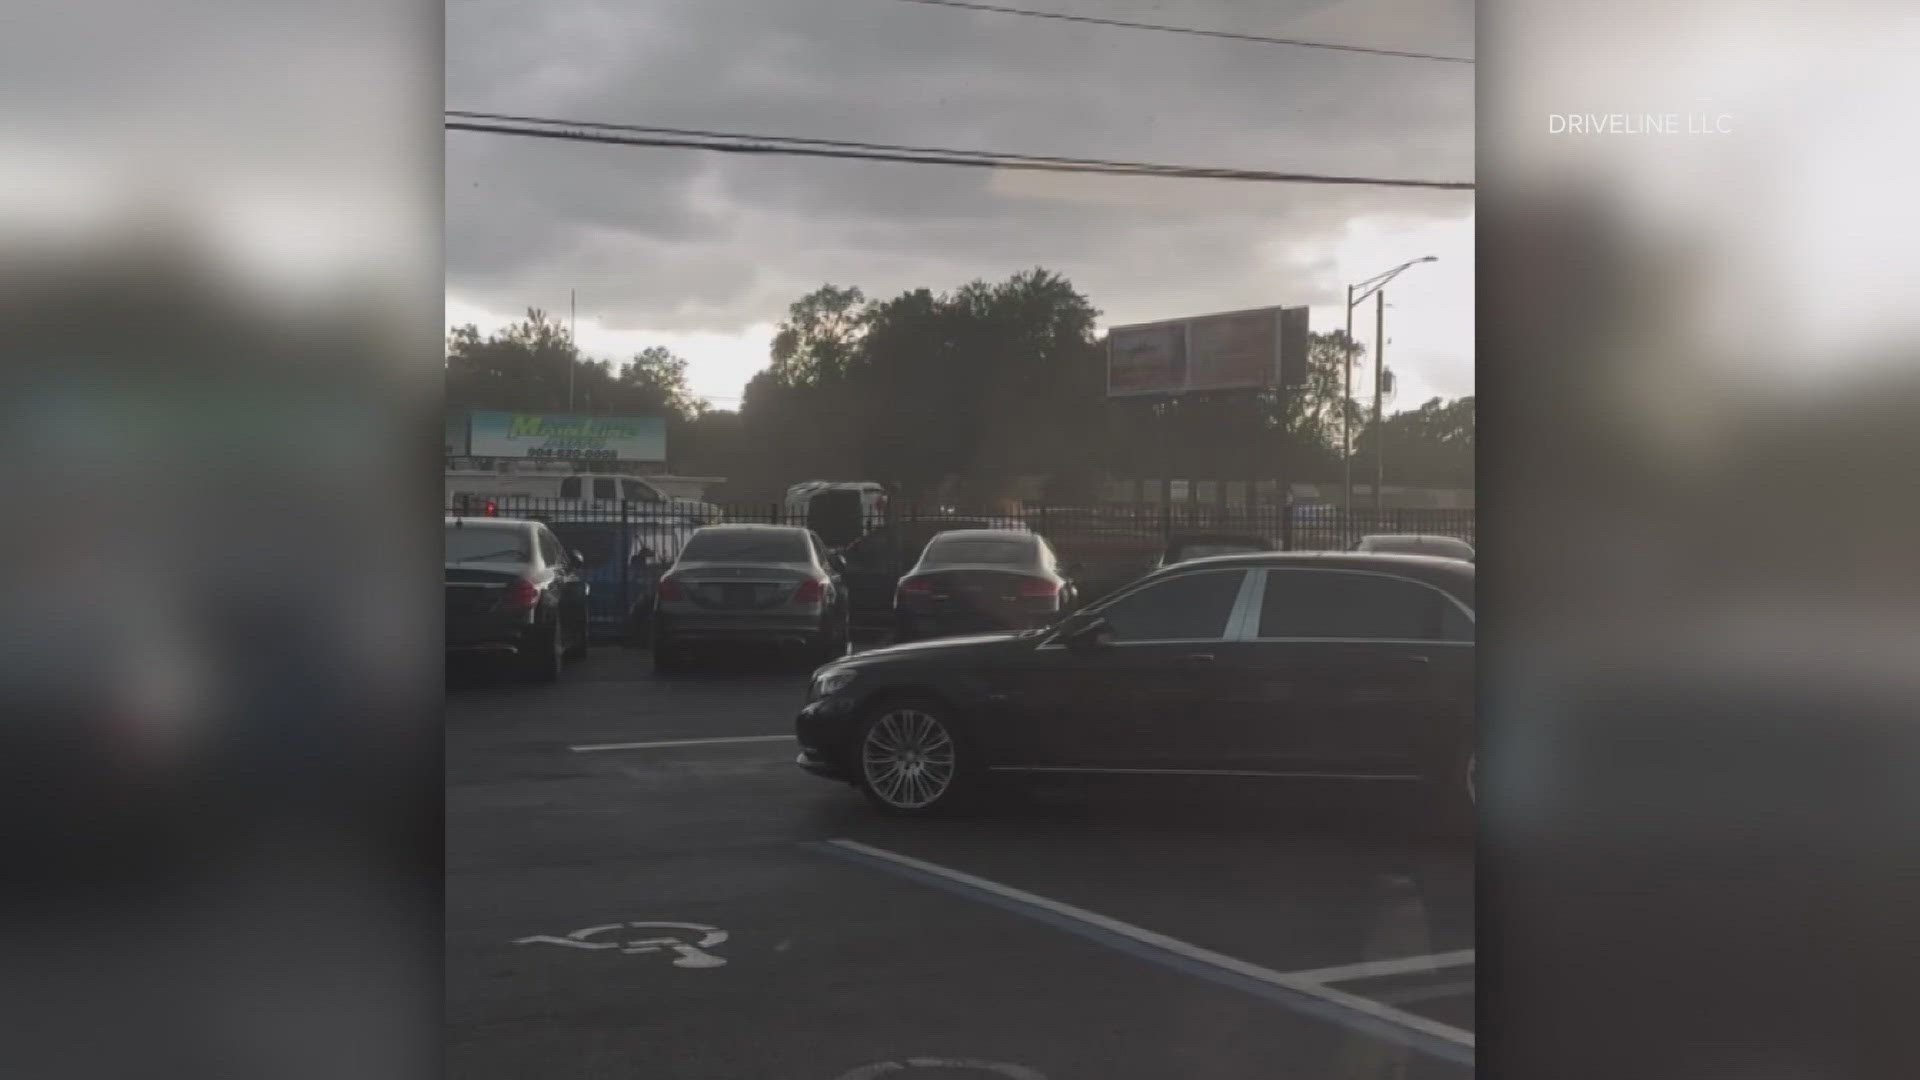 Videos show the roof of a strip mall getting ripped off and a car being flipped by the severe storms.